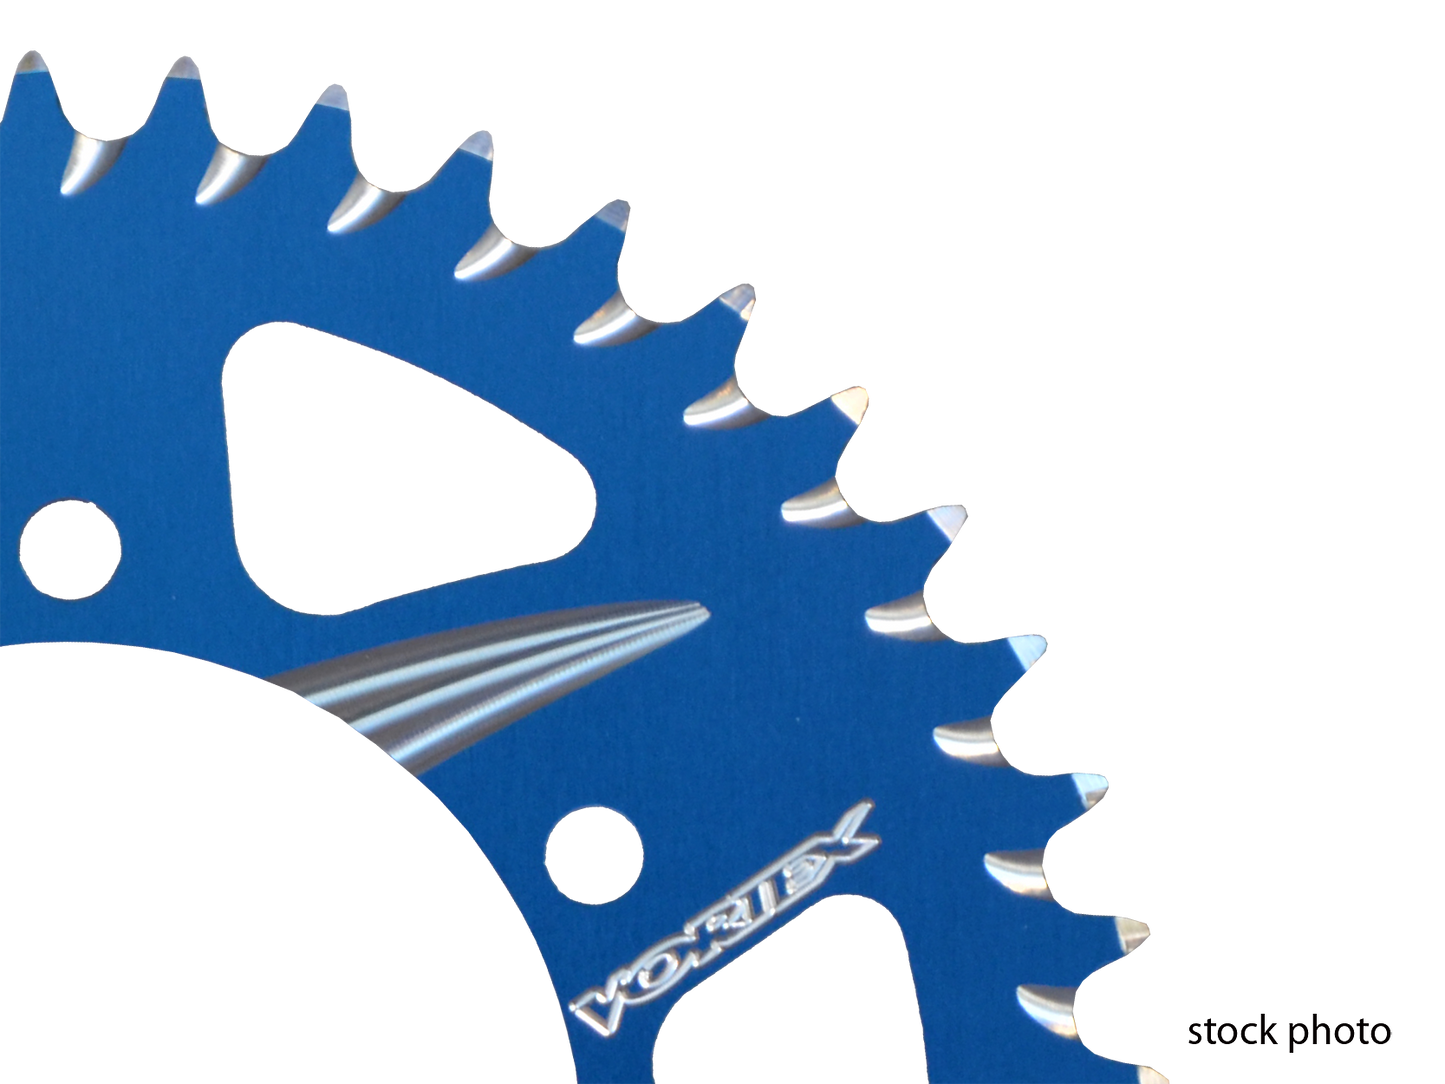 530 Yamaha Chain and Sprocket Set - Vortex - Colors to 54T